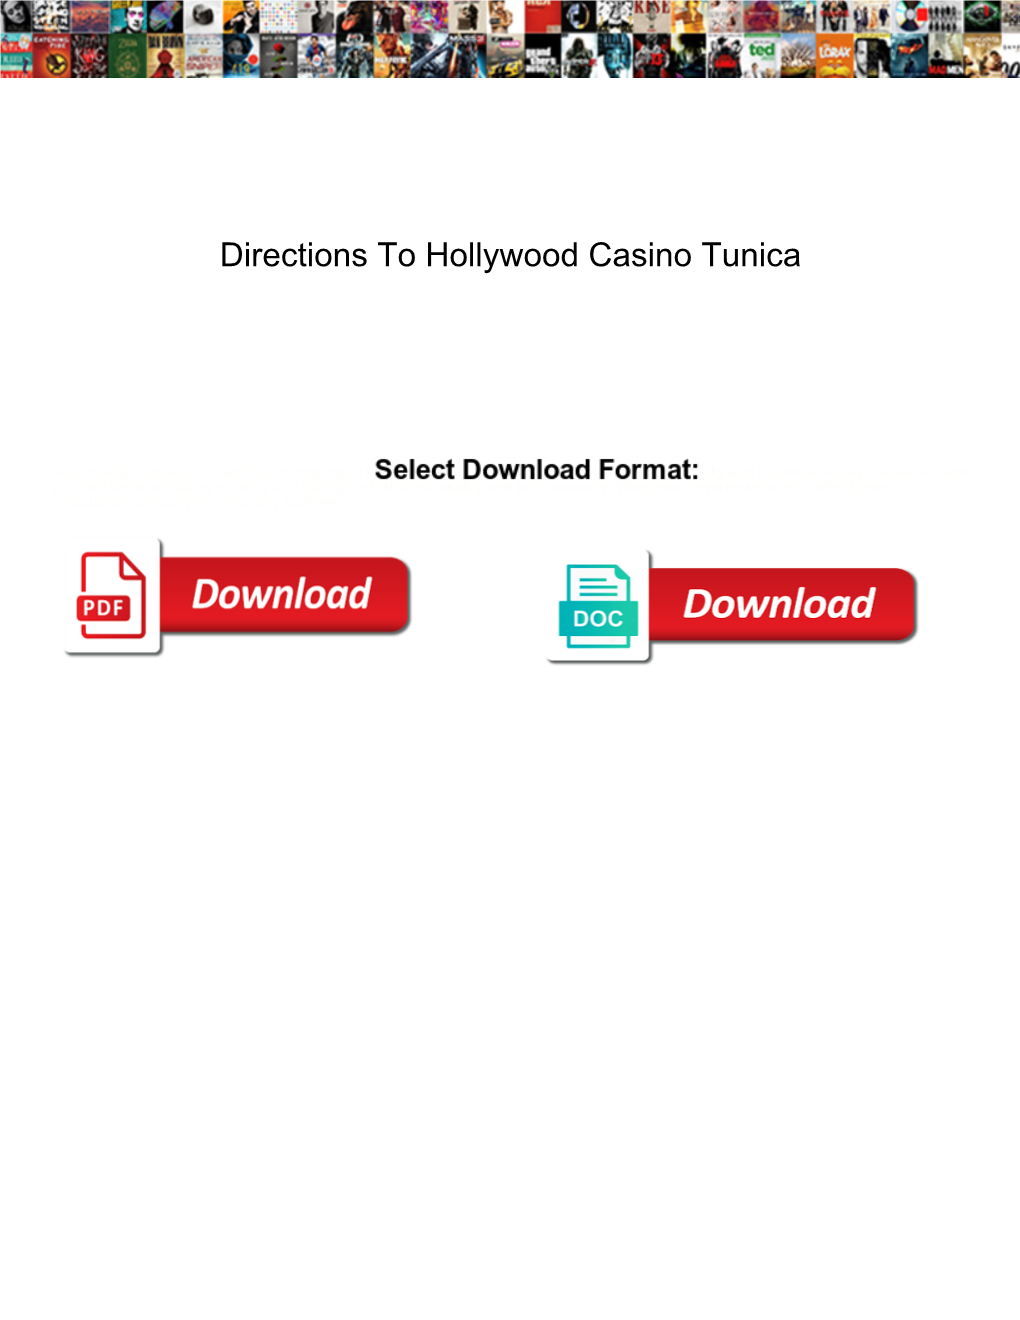 Directions to Hollywood Casino Tunica